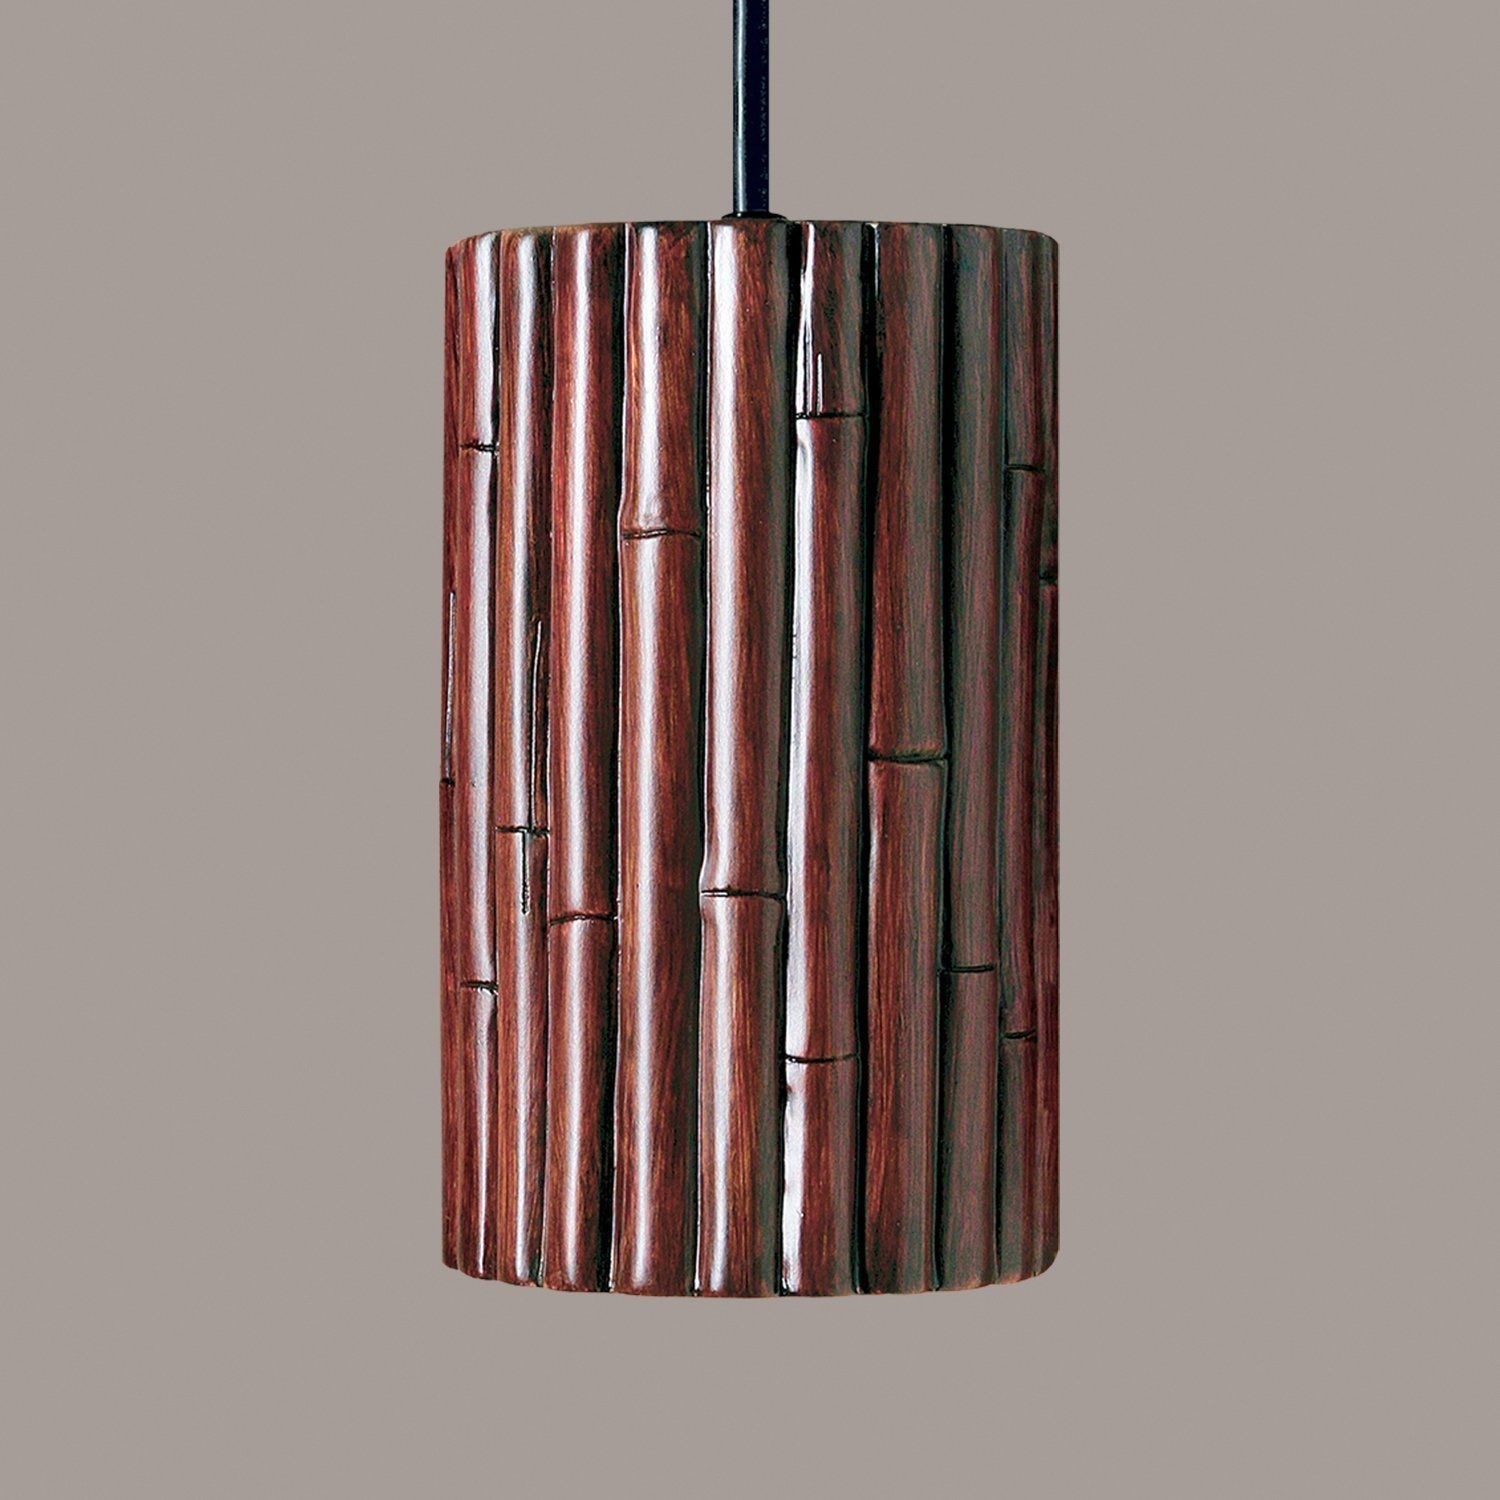 Bamboo pendant 1 light fixture shown in cinnamon by a19